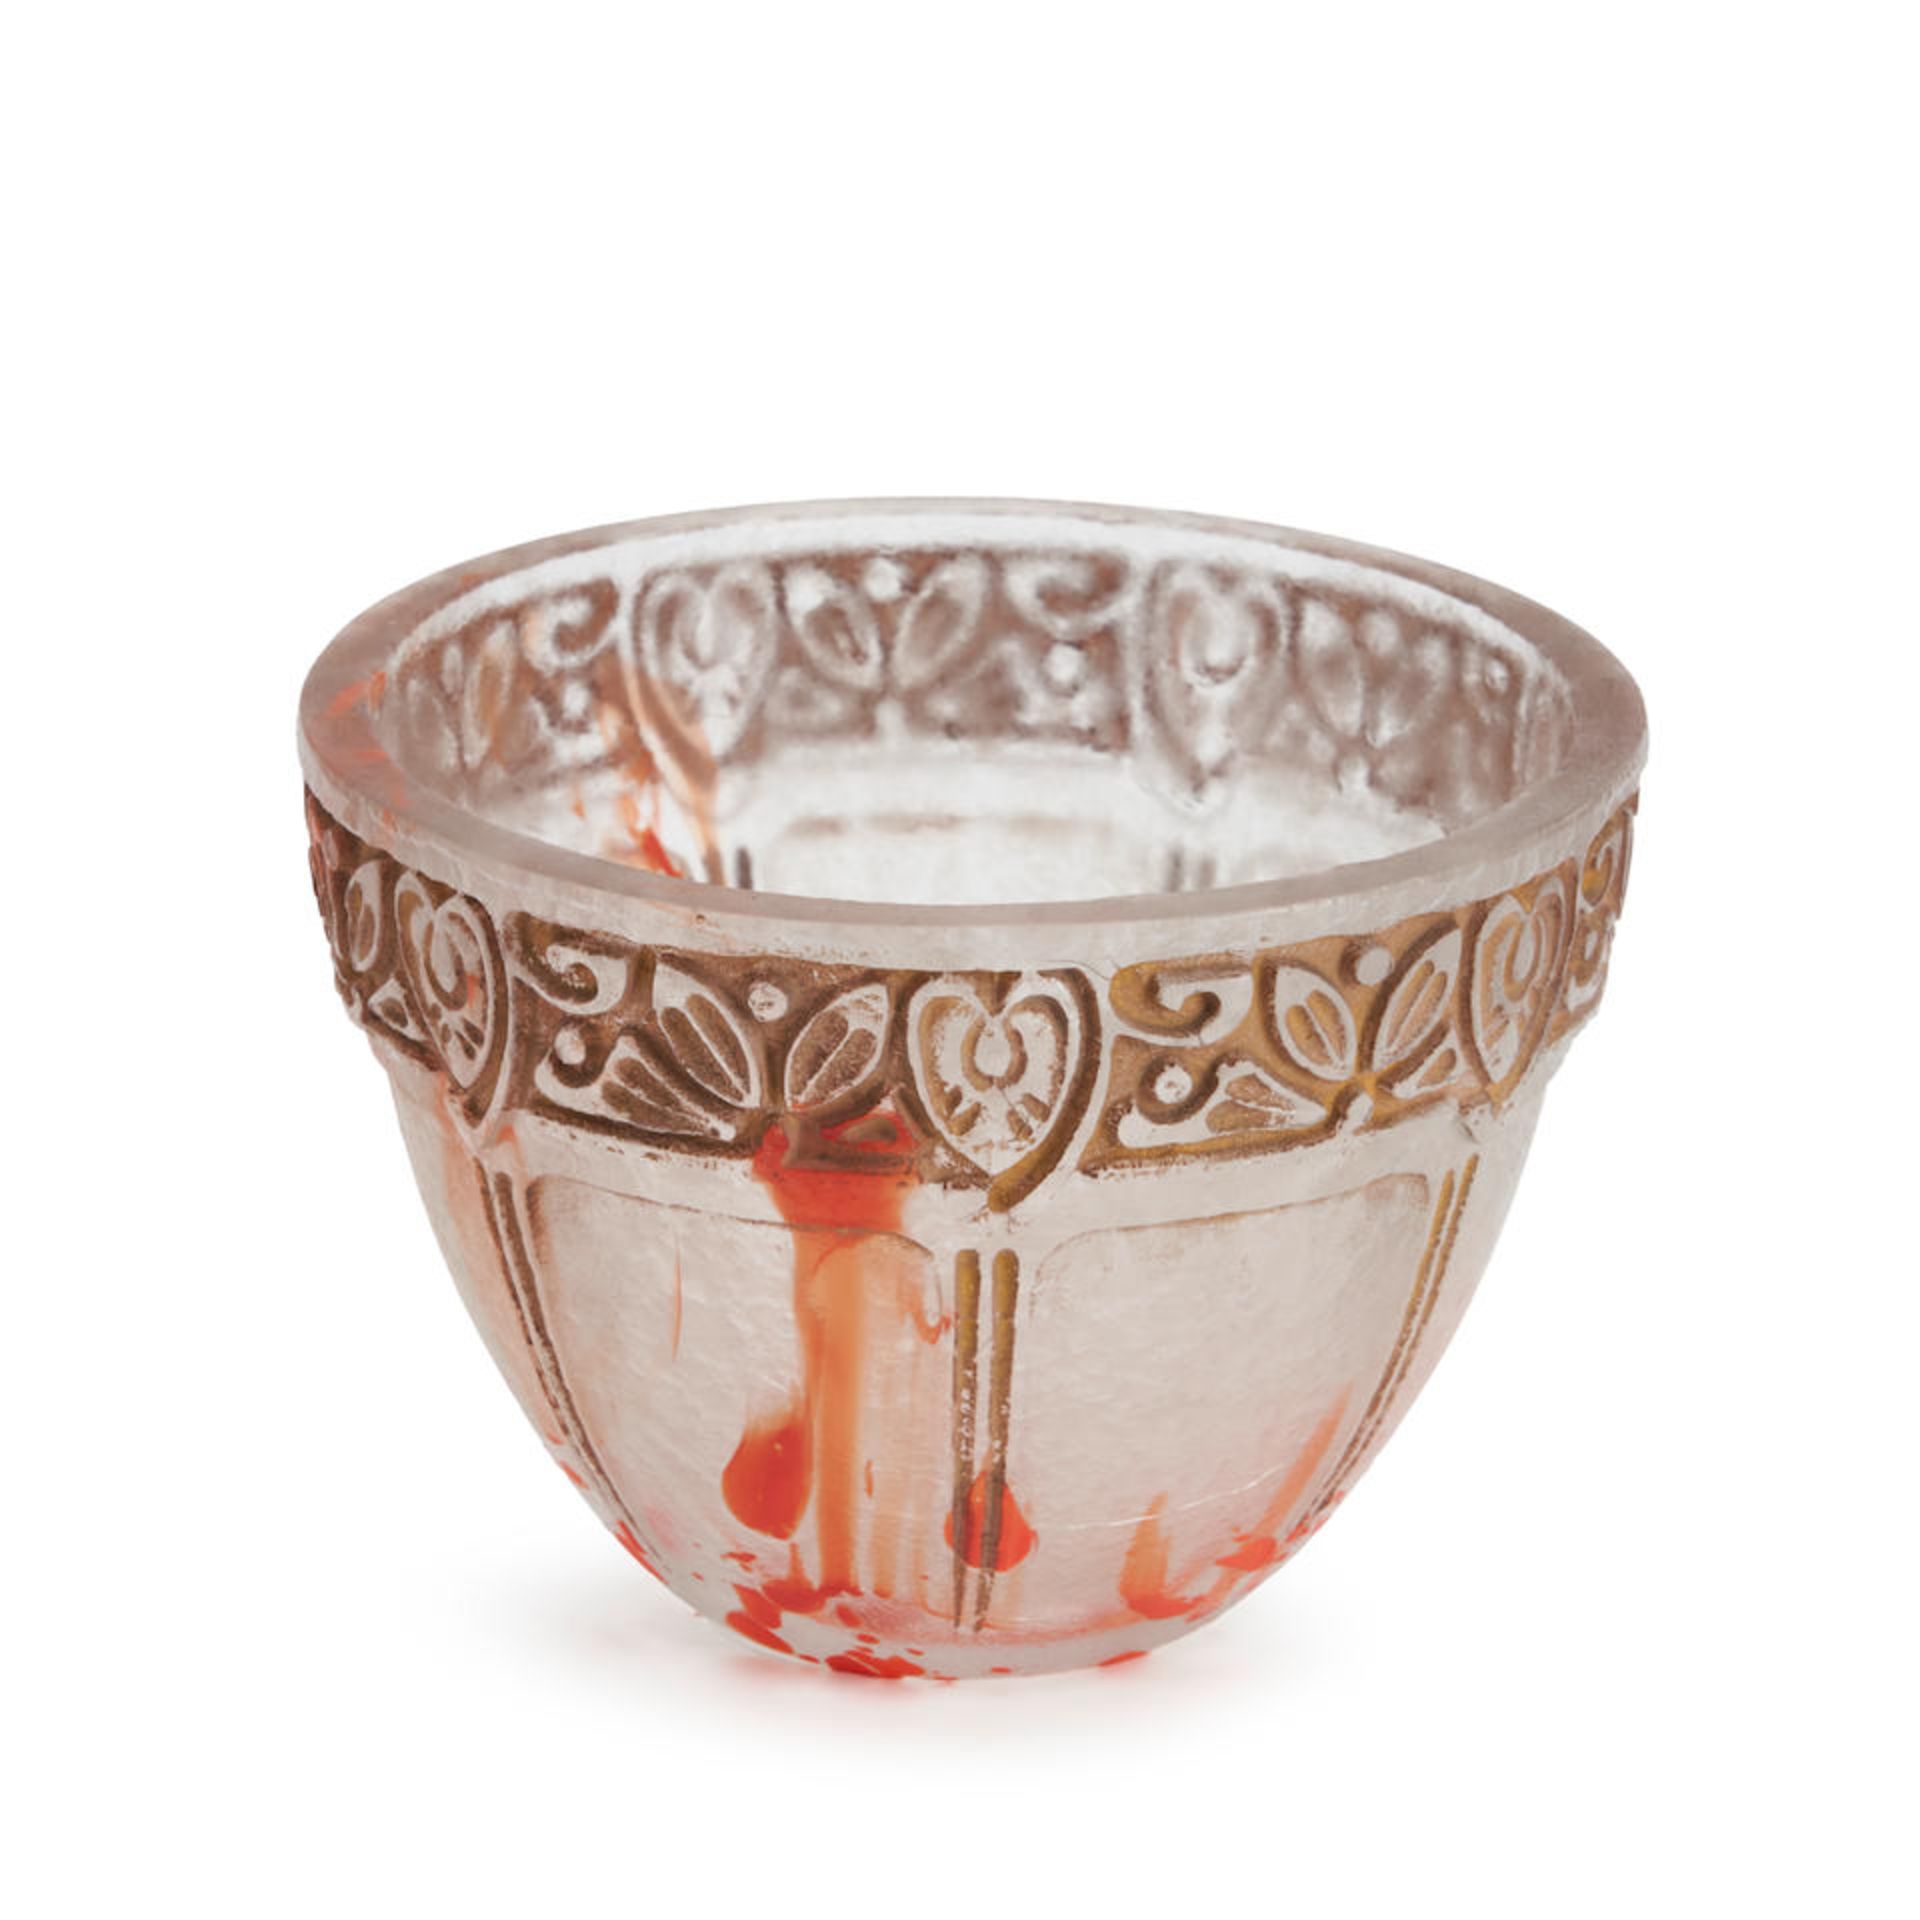 DAUM INTERNALY DECORATED, ACID-ETCHED AND PATINATED GLASS BOWL, Nancy, France, c. 1920, wheel-en...